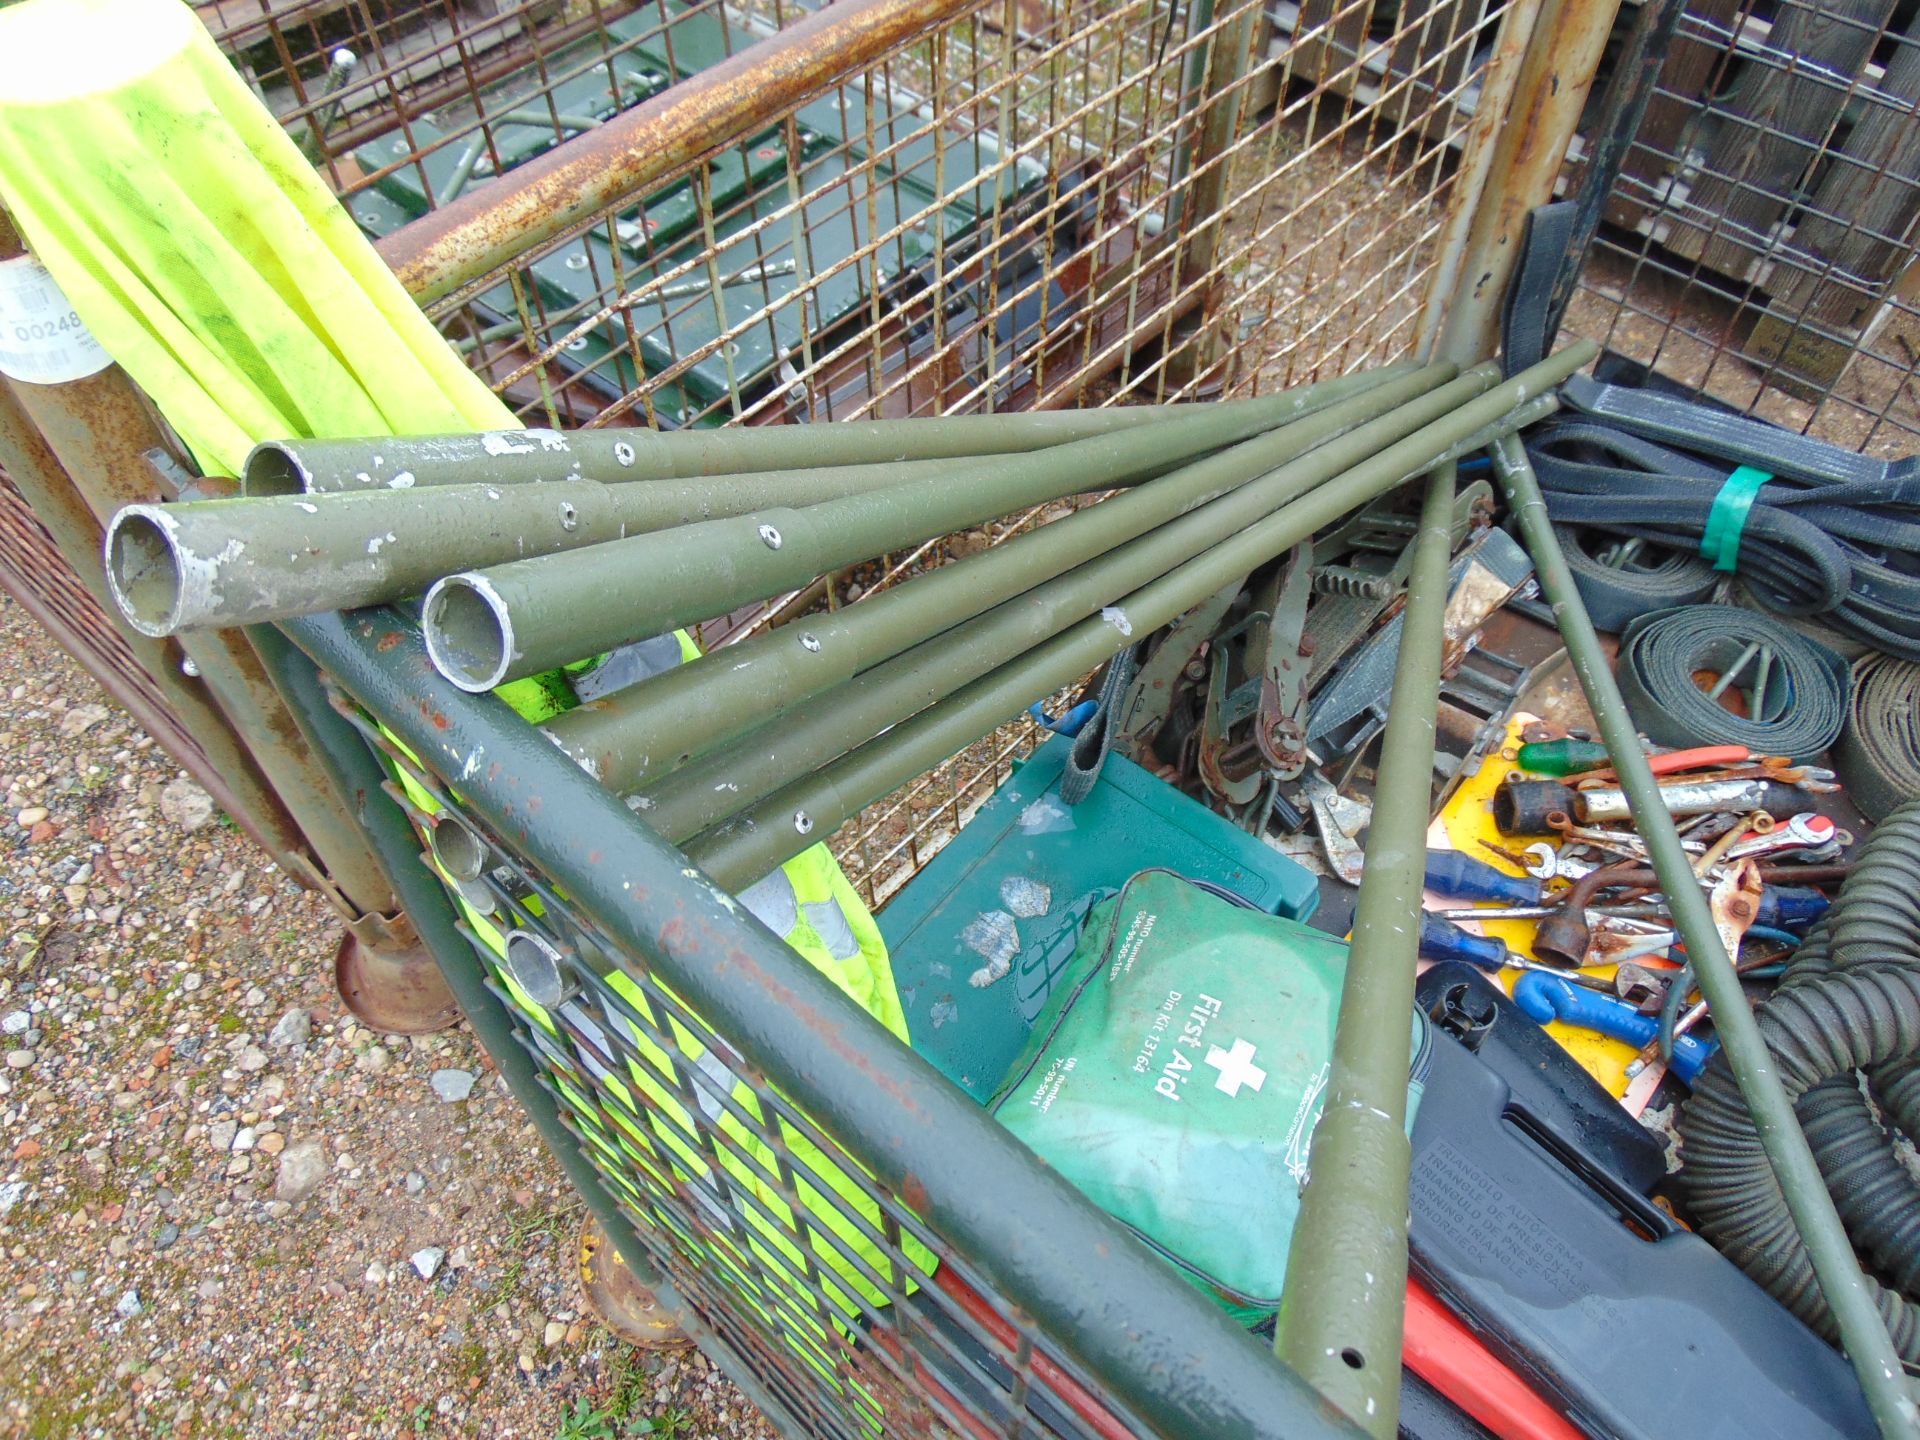 Tools, Camo Net Poles, Ratchets & Straps, First Aid Kits, Exhaust Disposal Hose etc - Image 9 of 9